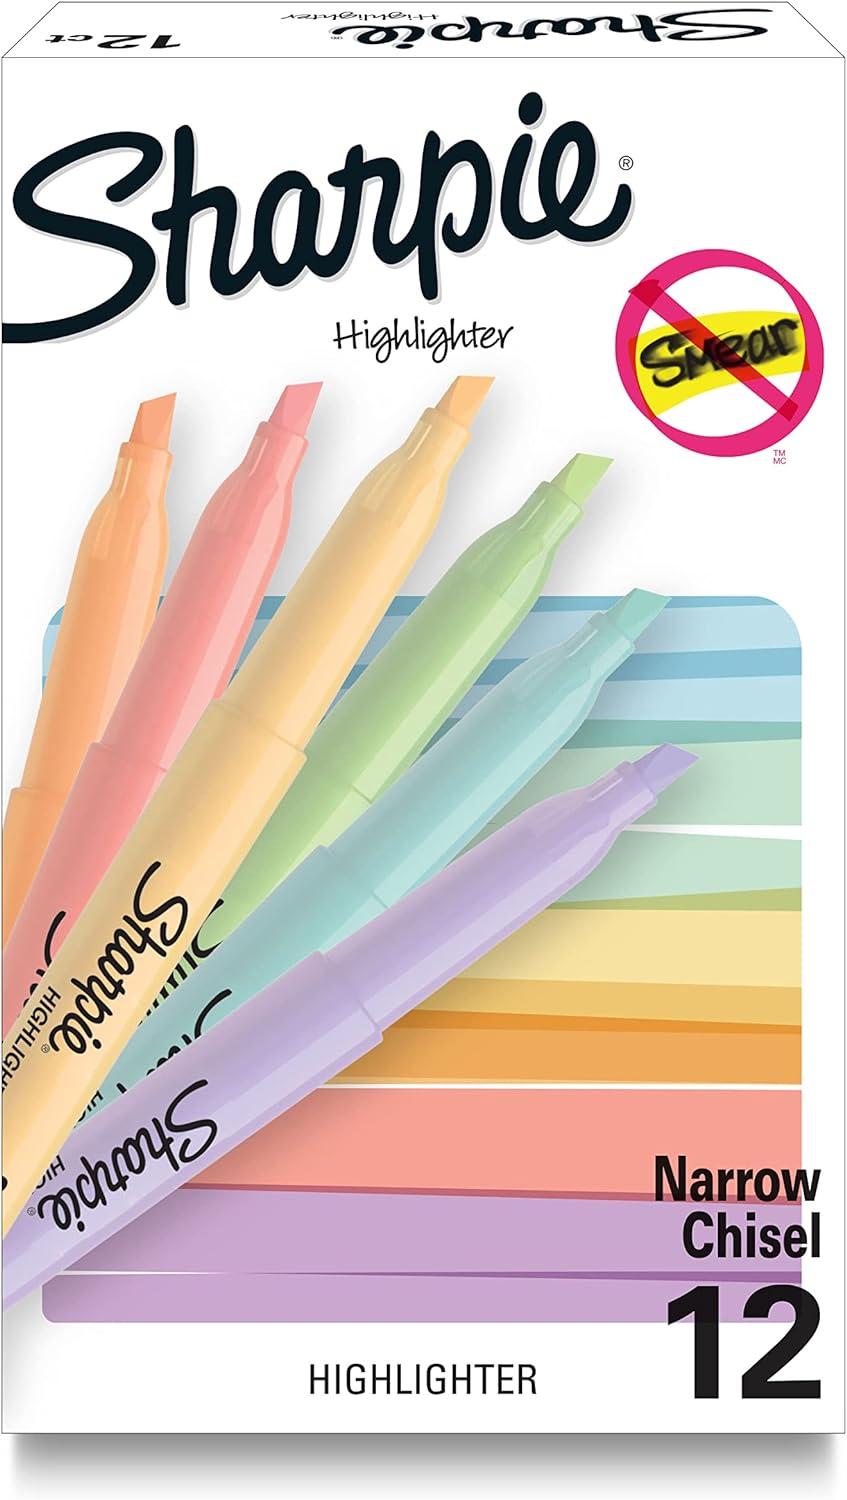 sharpie pocket highlighters mild pastel colors great stocking stuffer and holiday gift for college students